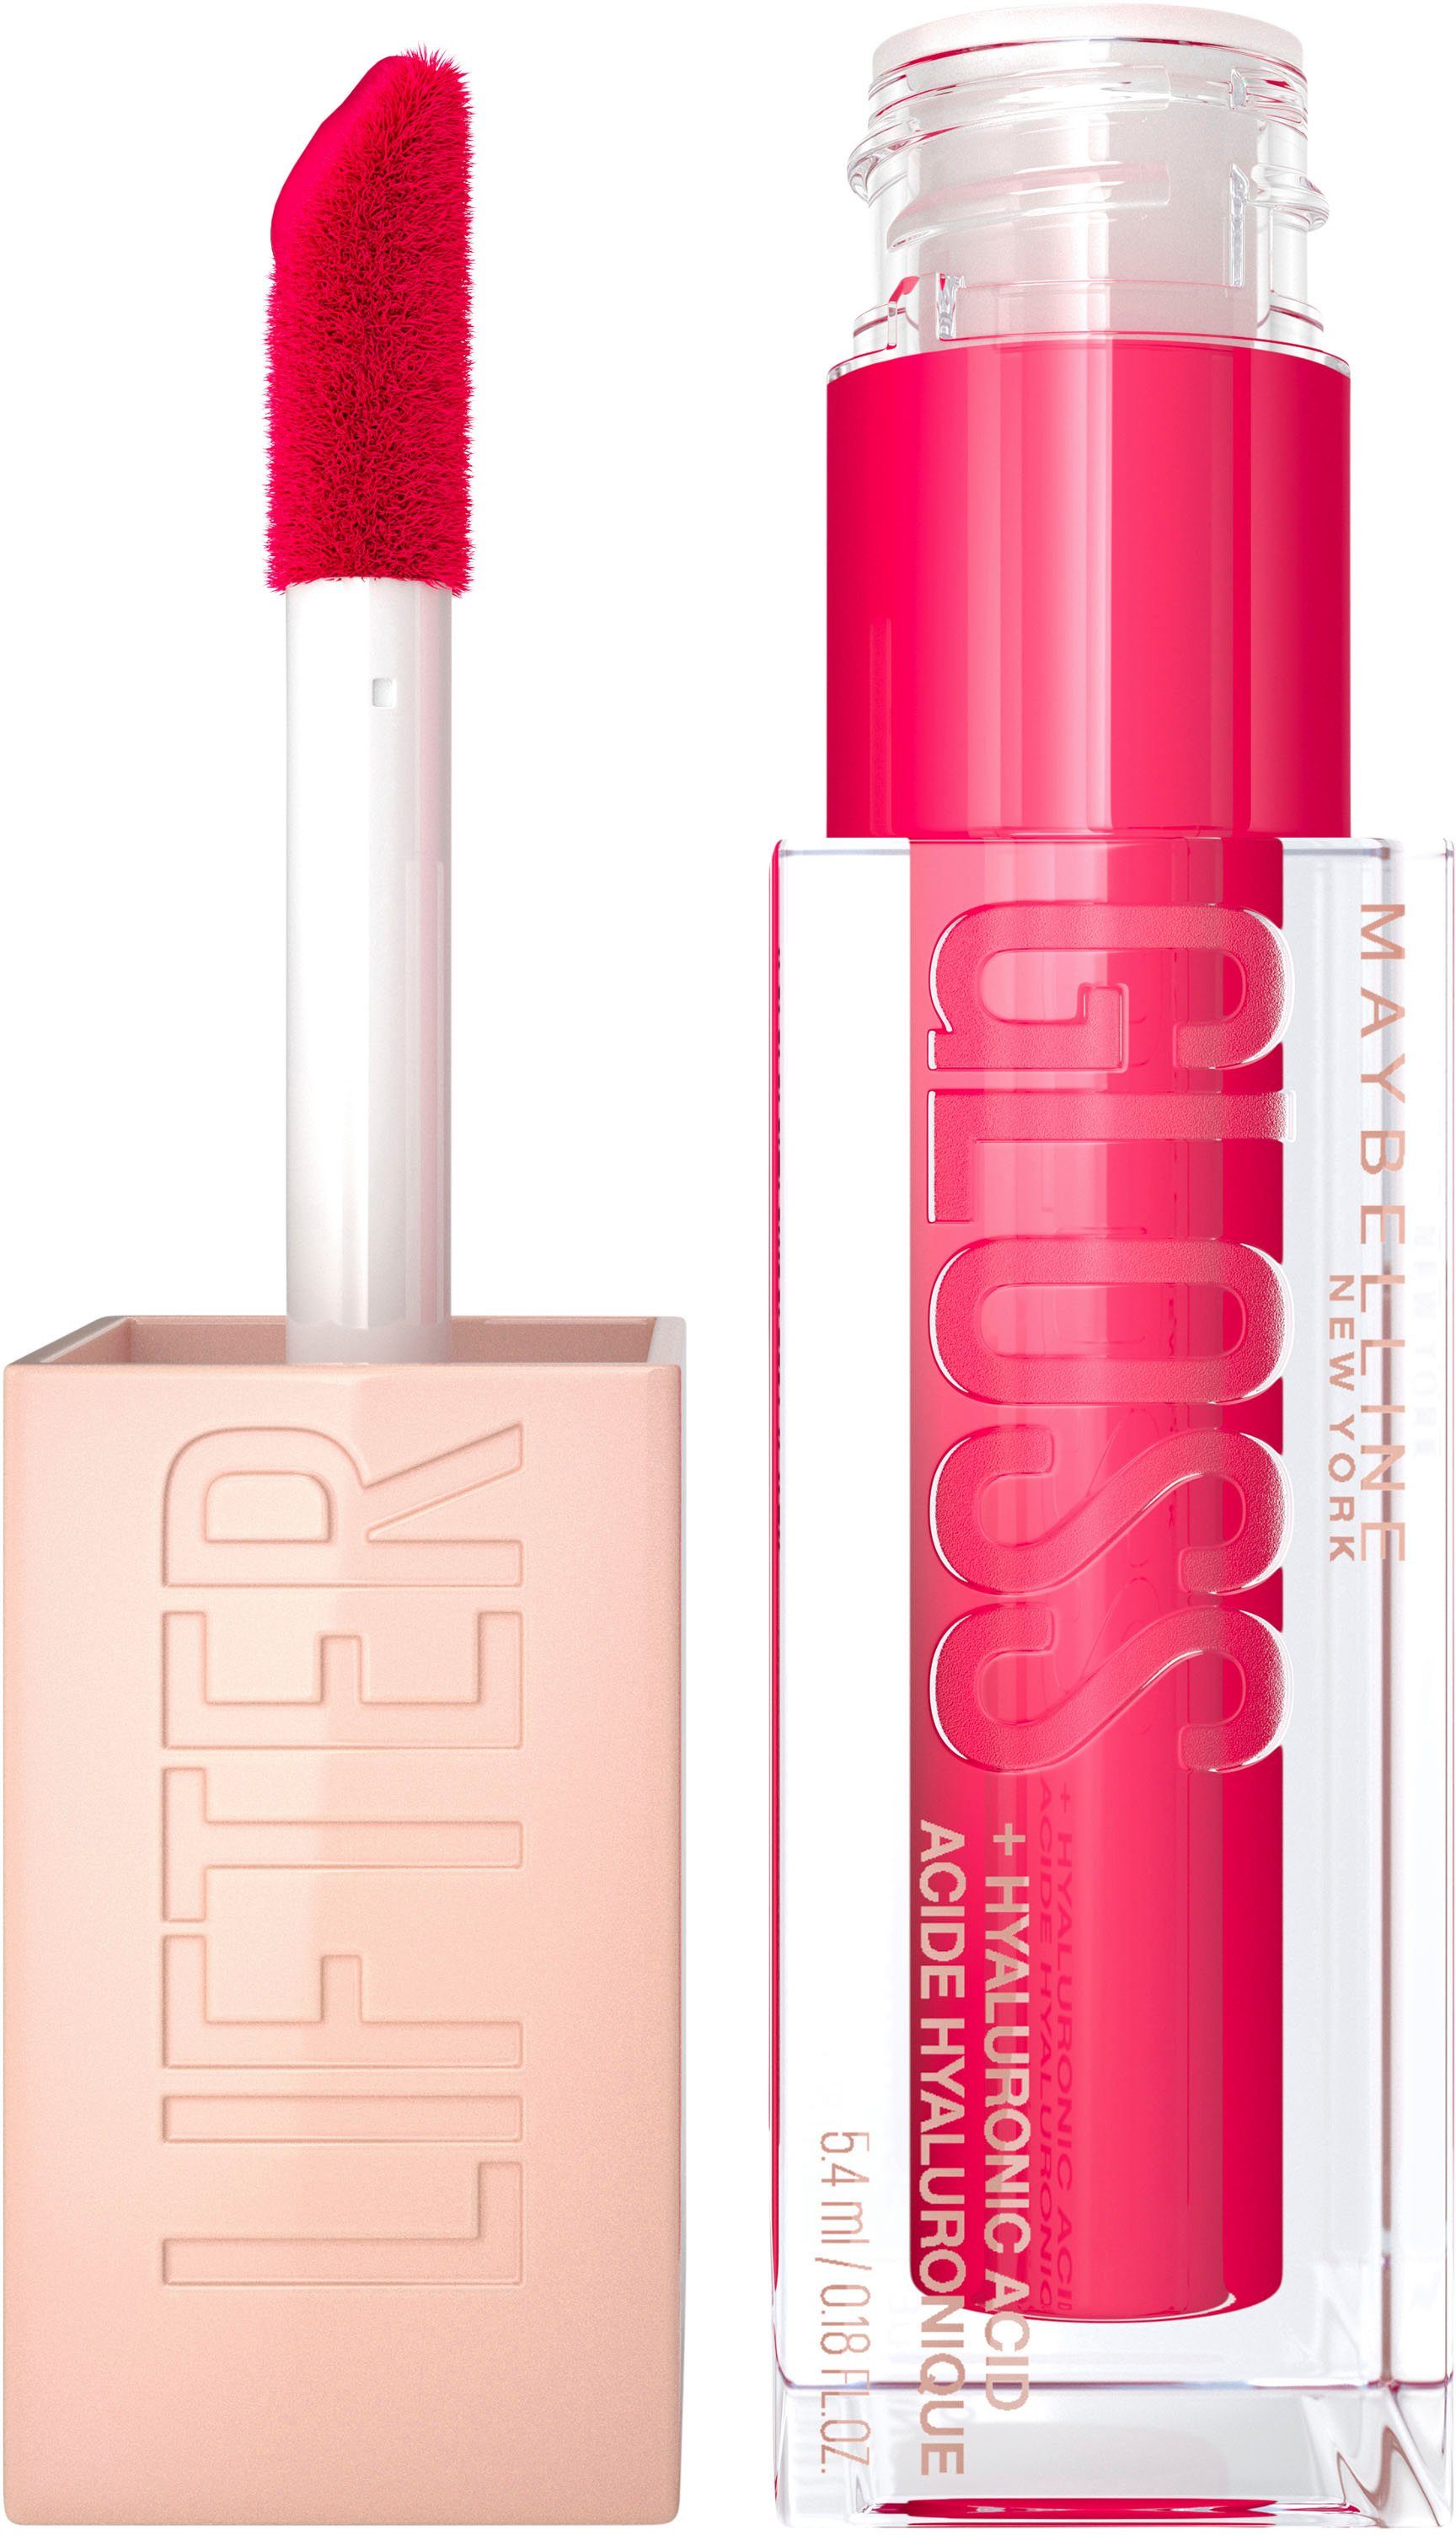 Gloss New York Lipgloss YORK MAYBELLINE Lifter NEW Maybelline